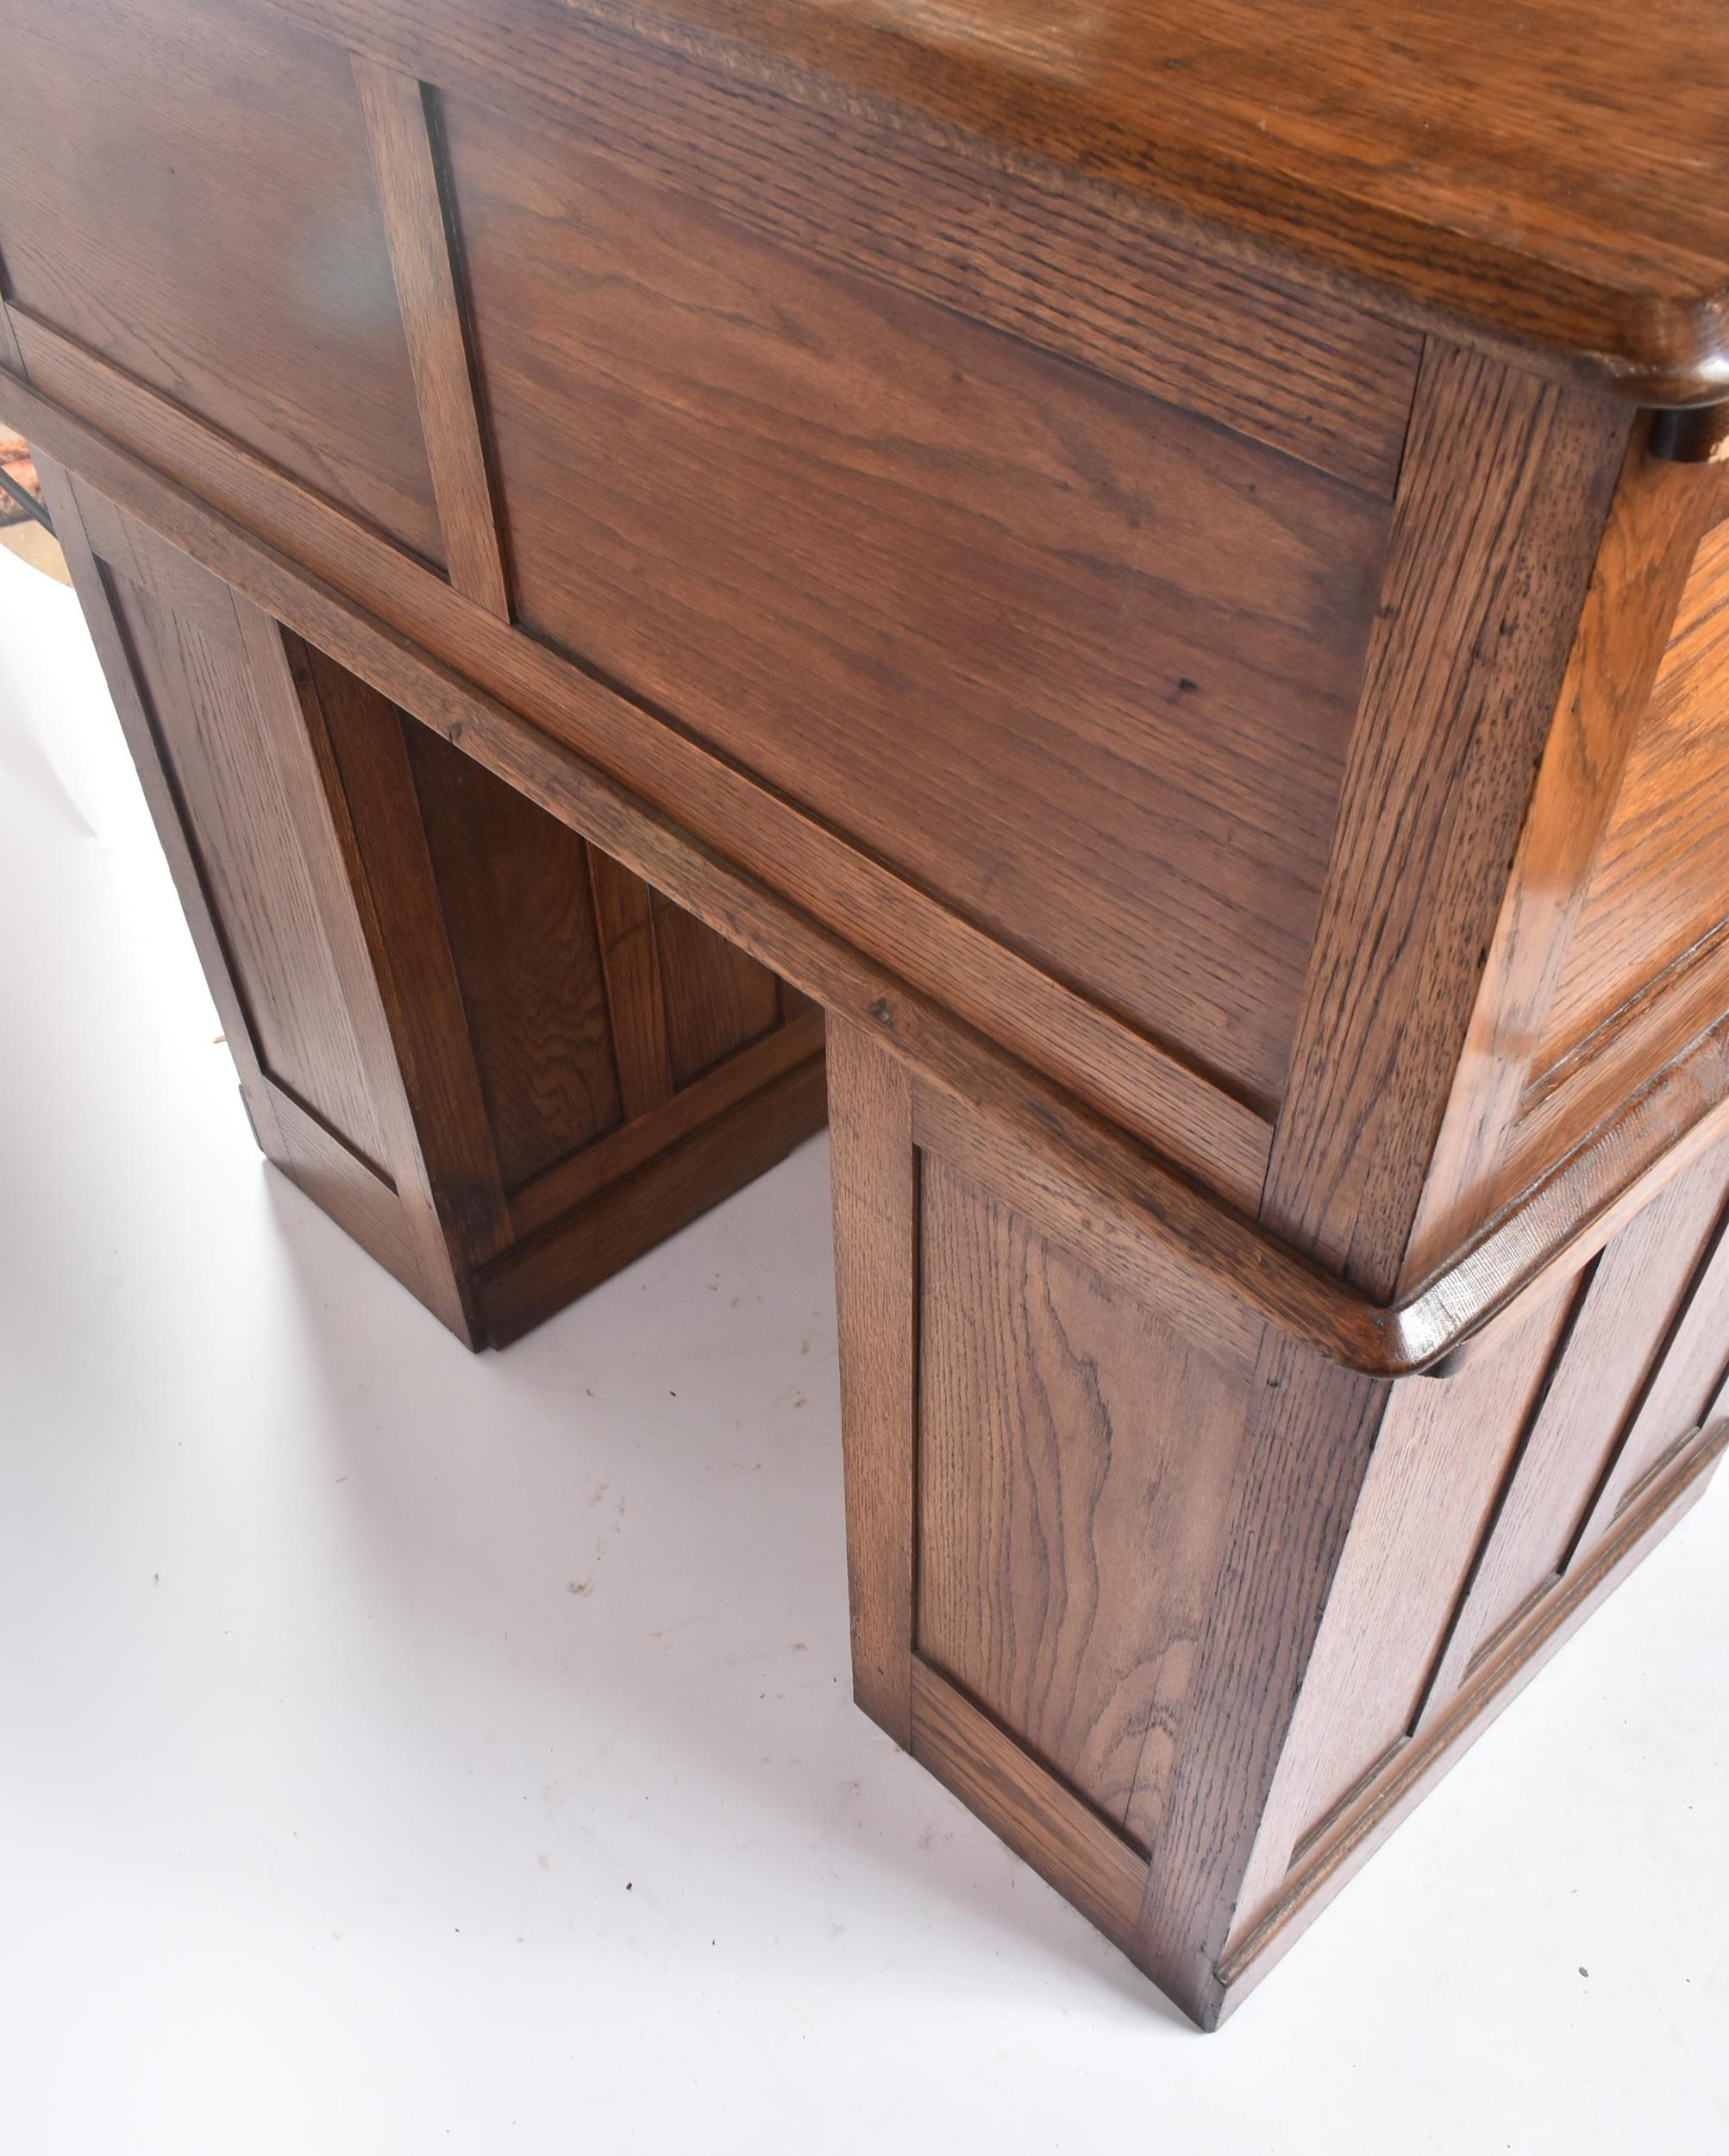 EARLY 20TH CENTURY 1920S OAK HILL'S FURNITURE ROLL TOP DESK - Image 6 of 6